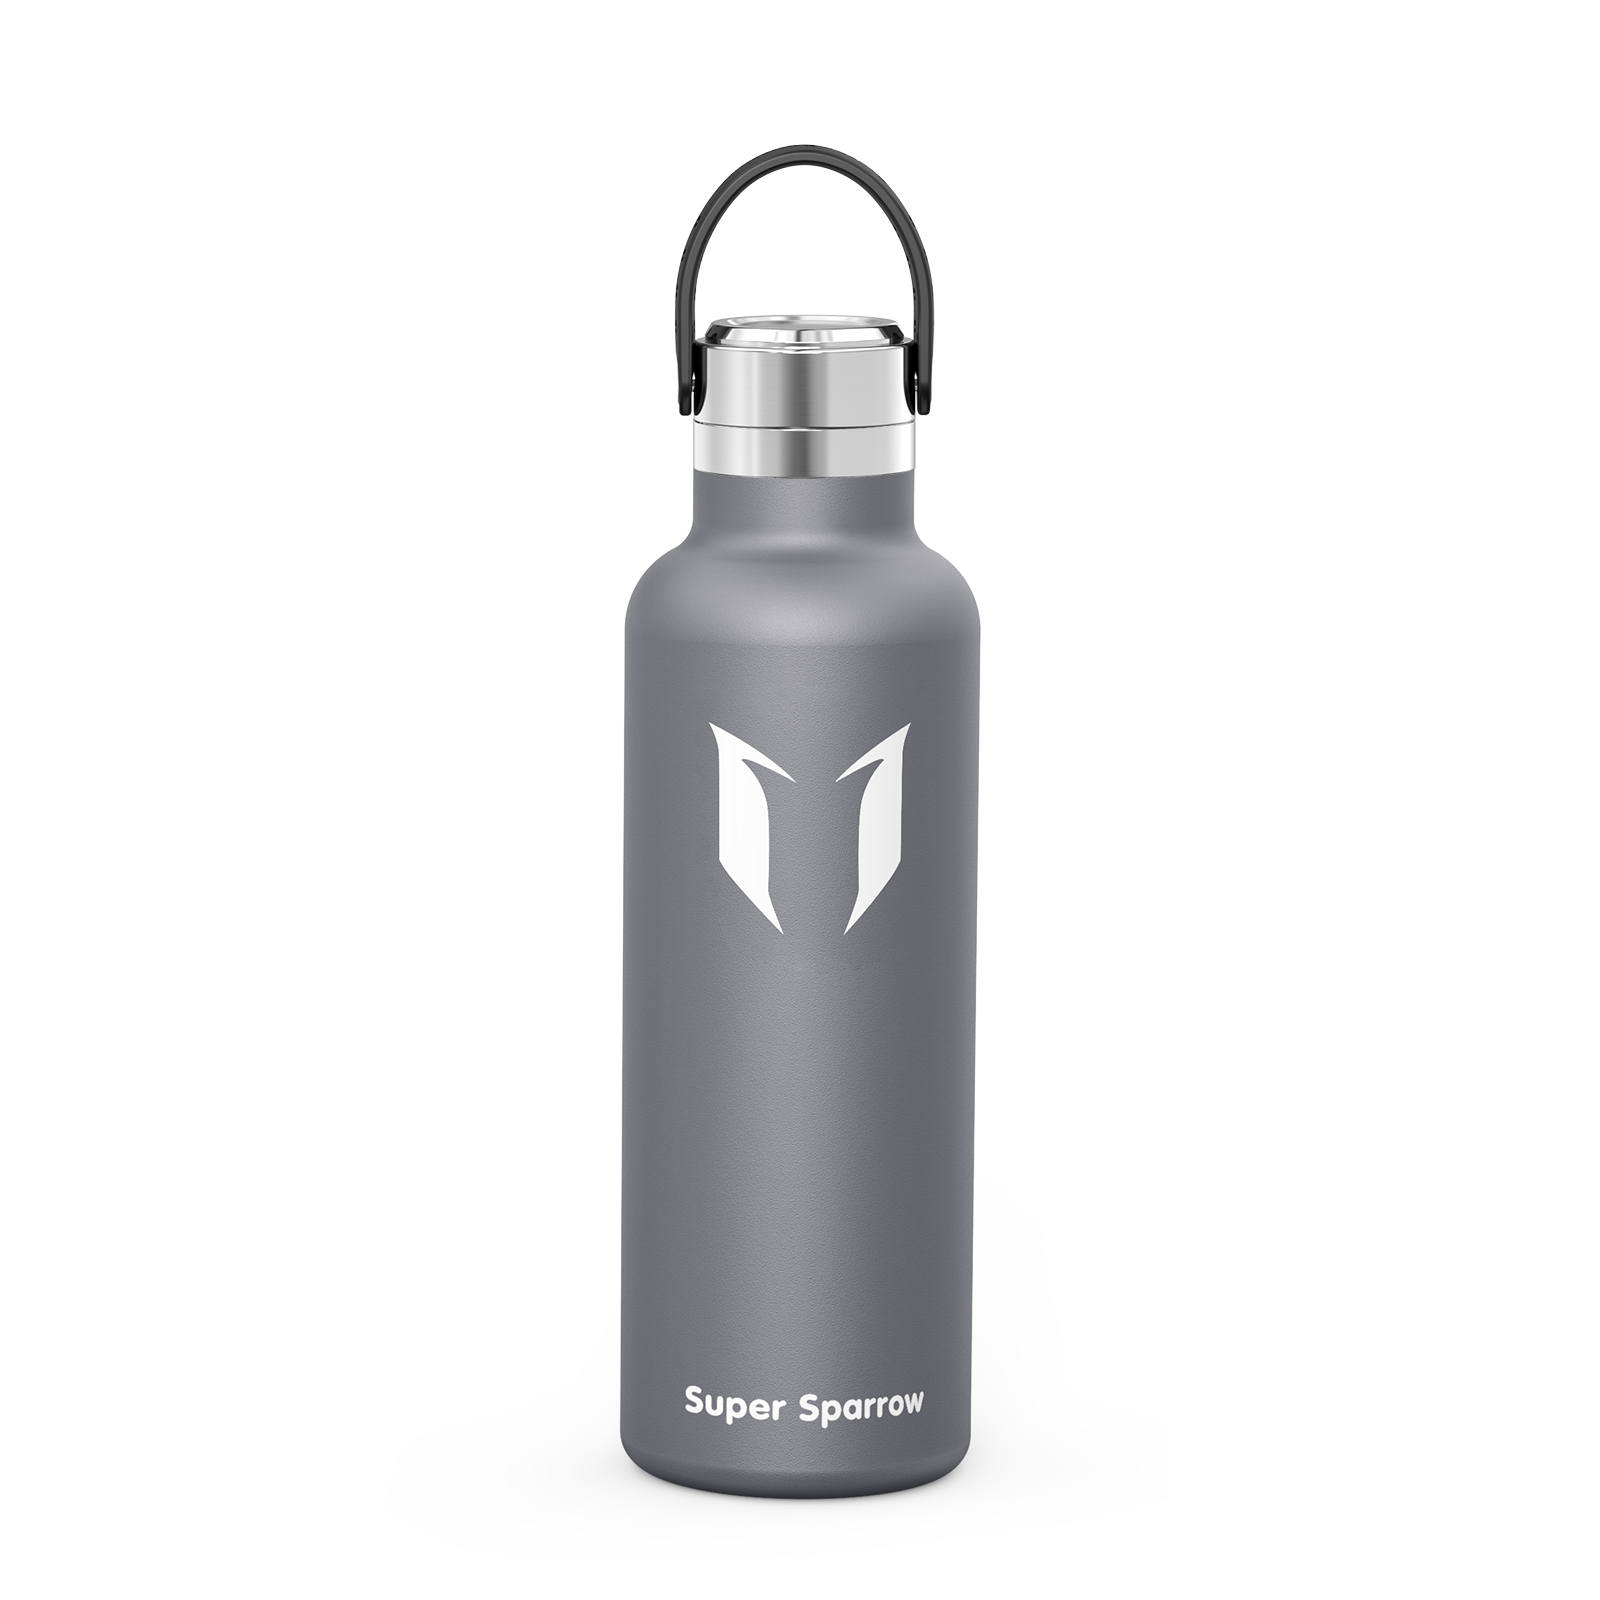  Super Sparrow Stainless Steel Water Bottle - 350ml - Vacuum  Insulated Metal Water Bottle - Standard Mouth Flask - BPA Free - Straw  Water Bottle for Gym, Travel, Sports : Sports & Outdoors